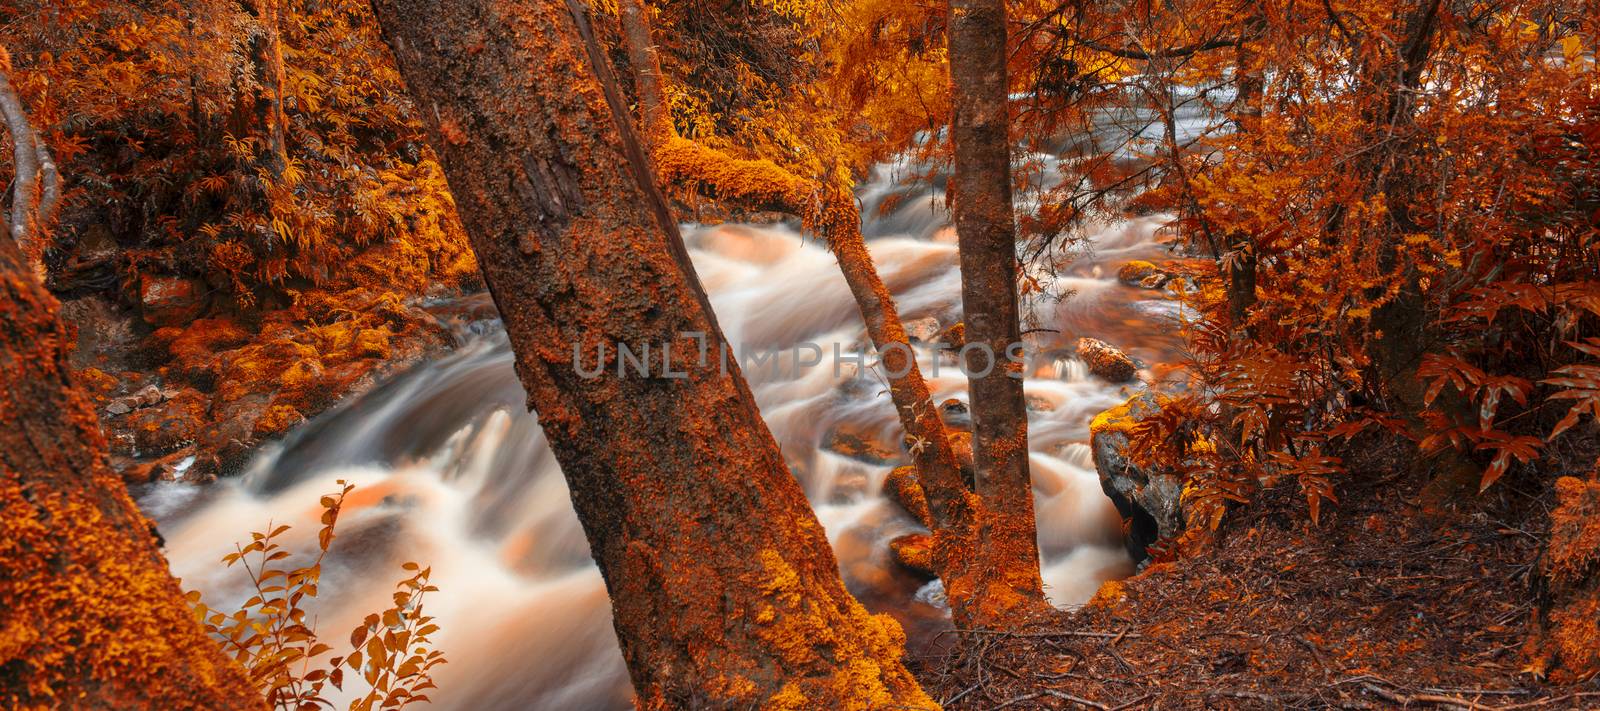 Newell creek in Tasmania, Australia is a magnificent fast running stream. Abstract landscape with red hues added.